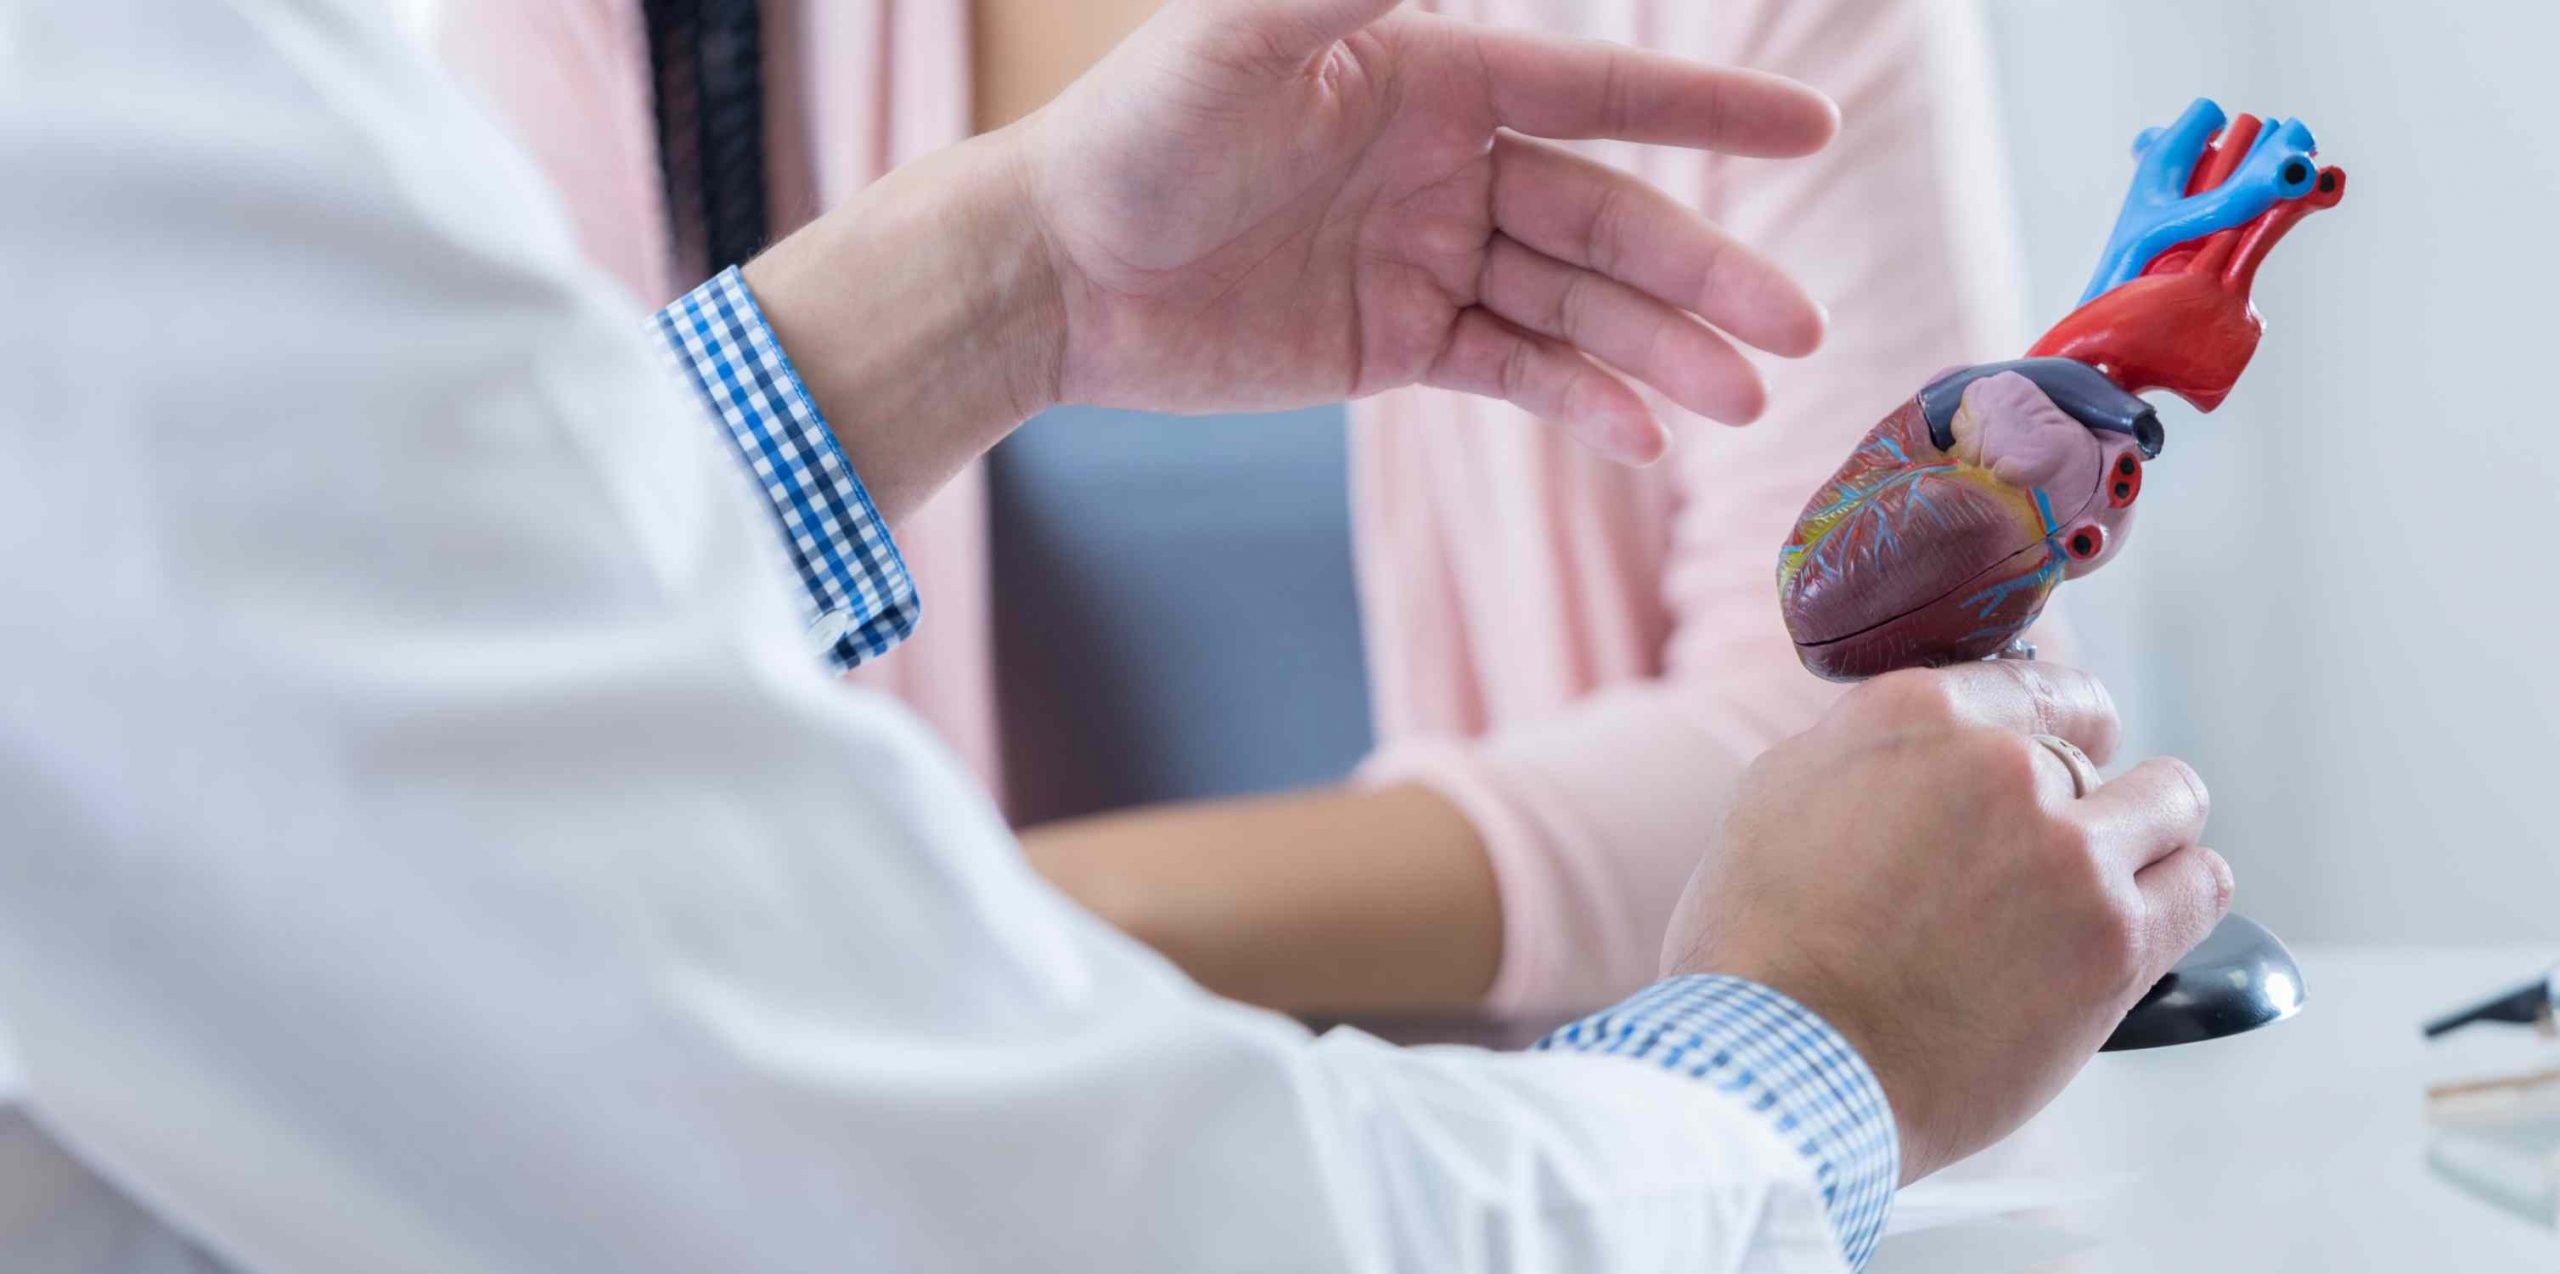 First Time at a Cardiologist? What to Expect During Your Appointment